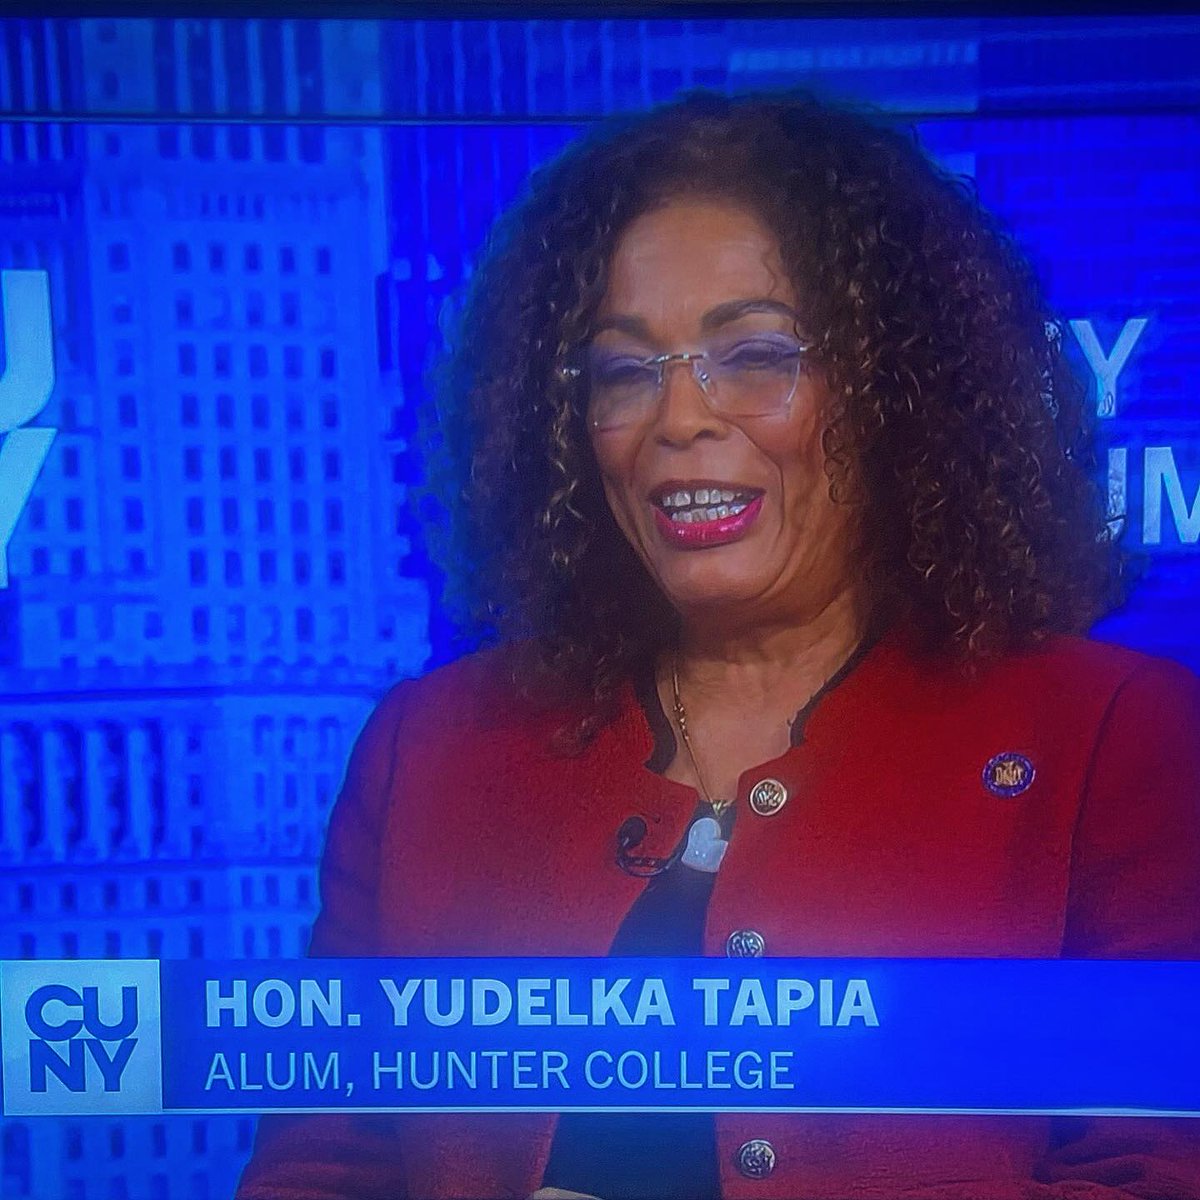 GAC is on TV! Senior VP Bob Liff hosts CUNY Forum, discussing today’s politics. Guests include Assemblymember @DeborahJGlick, NYC Councilmember @ShahanaFromBK, & Assemblymember @YudelkaTapia! Watch: tv.cuny.edu/homepage/show/… #GAC #CUNY #georgearzt #georgearztcommunications